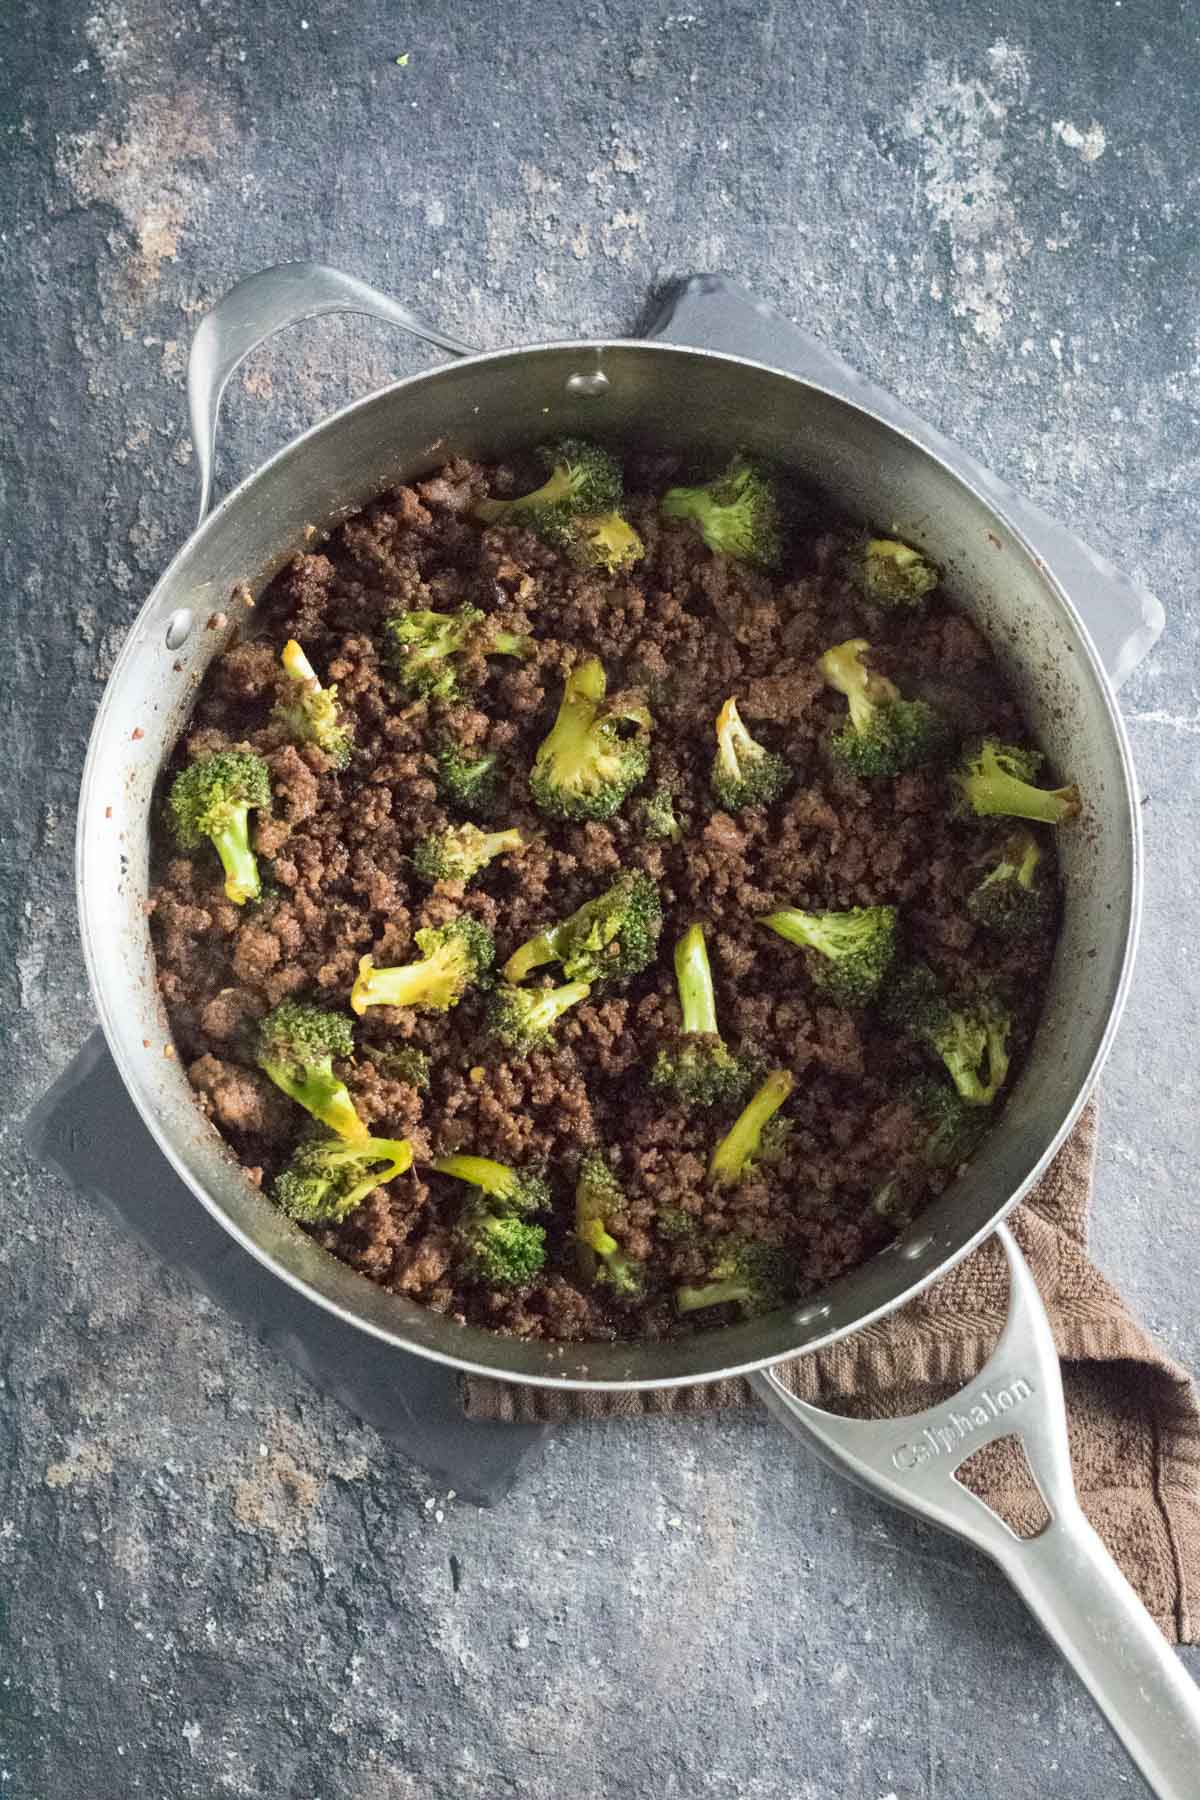 Cooked ground beef and broccoli shown in the skillet.